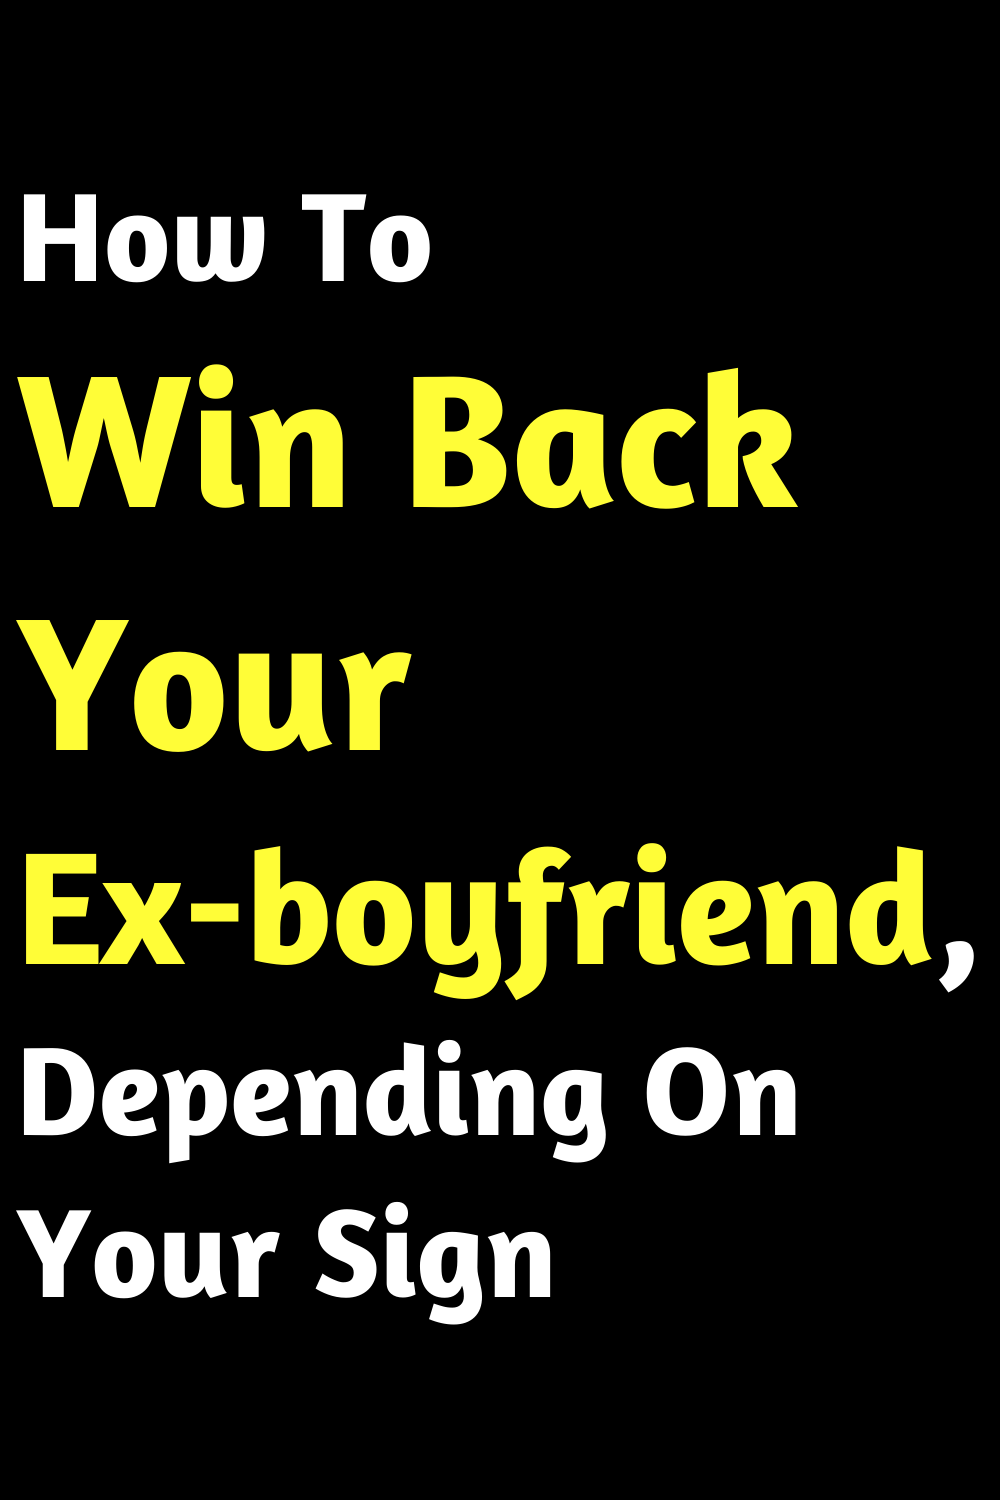 How To Win Back Your Ex-boyfriend, Depending On Your Sign